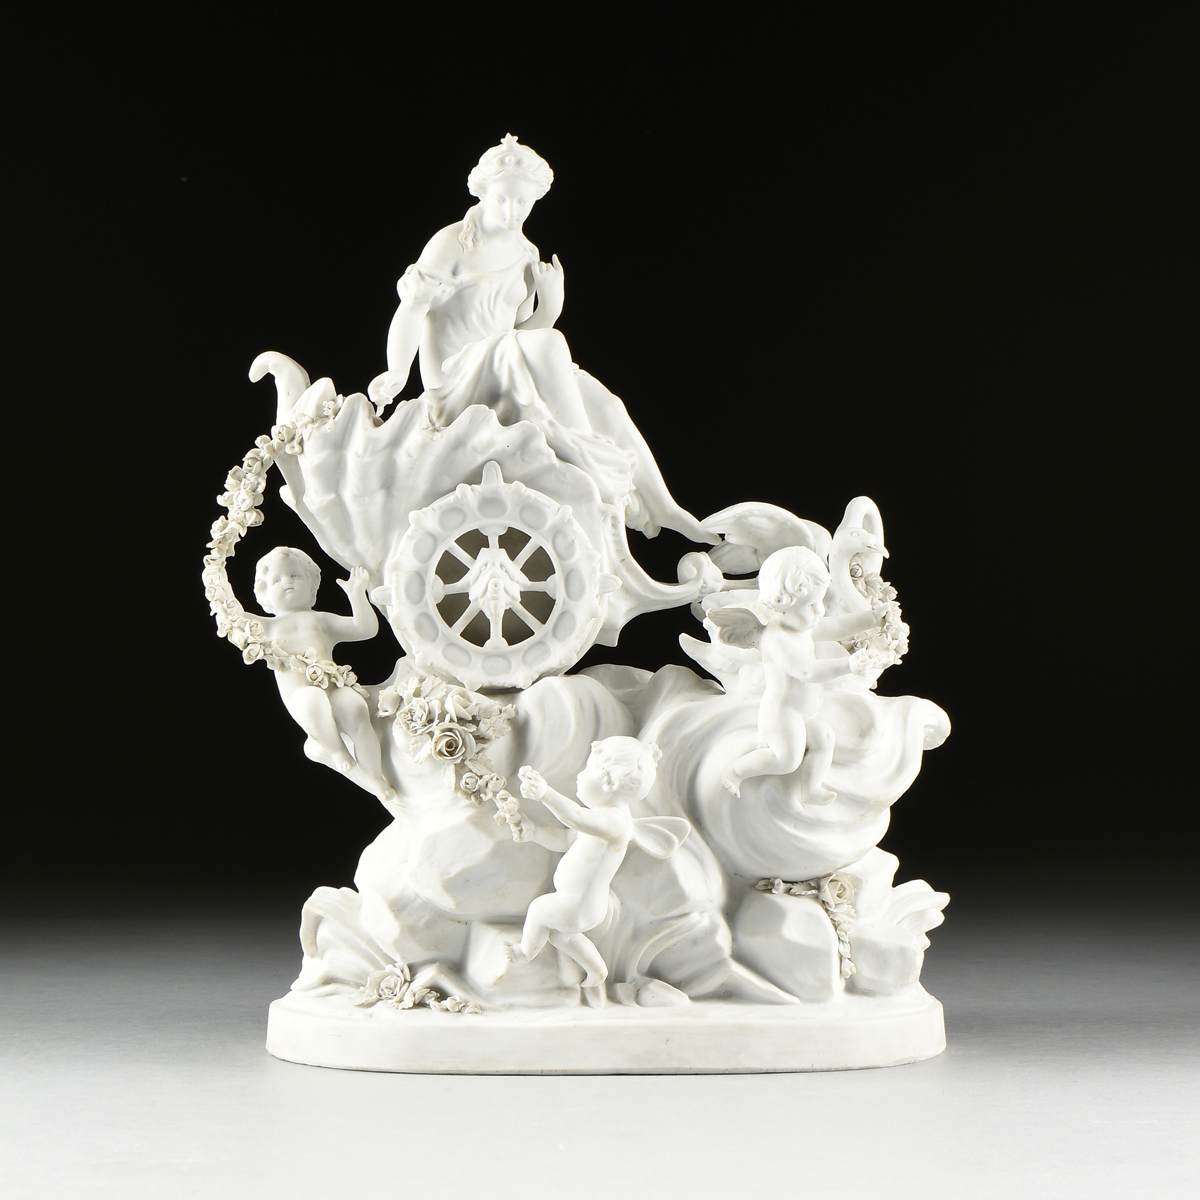 A BAROQUE REVIVAL BISQUE PORCELAIN FIGURAL GROUPING, "Allegory of Spring," POSSIBLY GERMAN, LATE